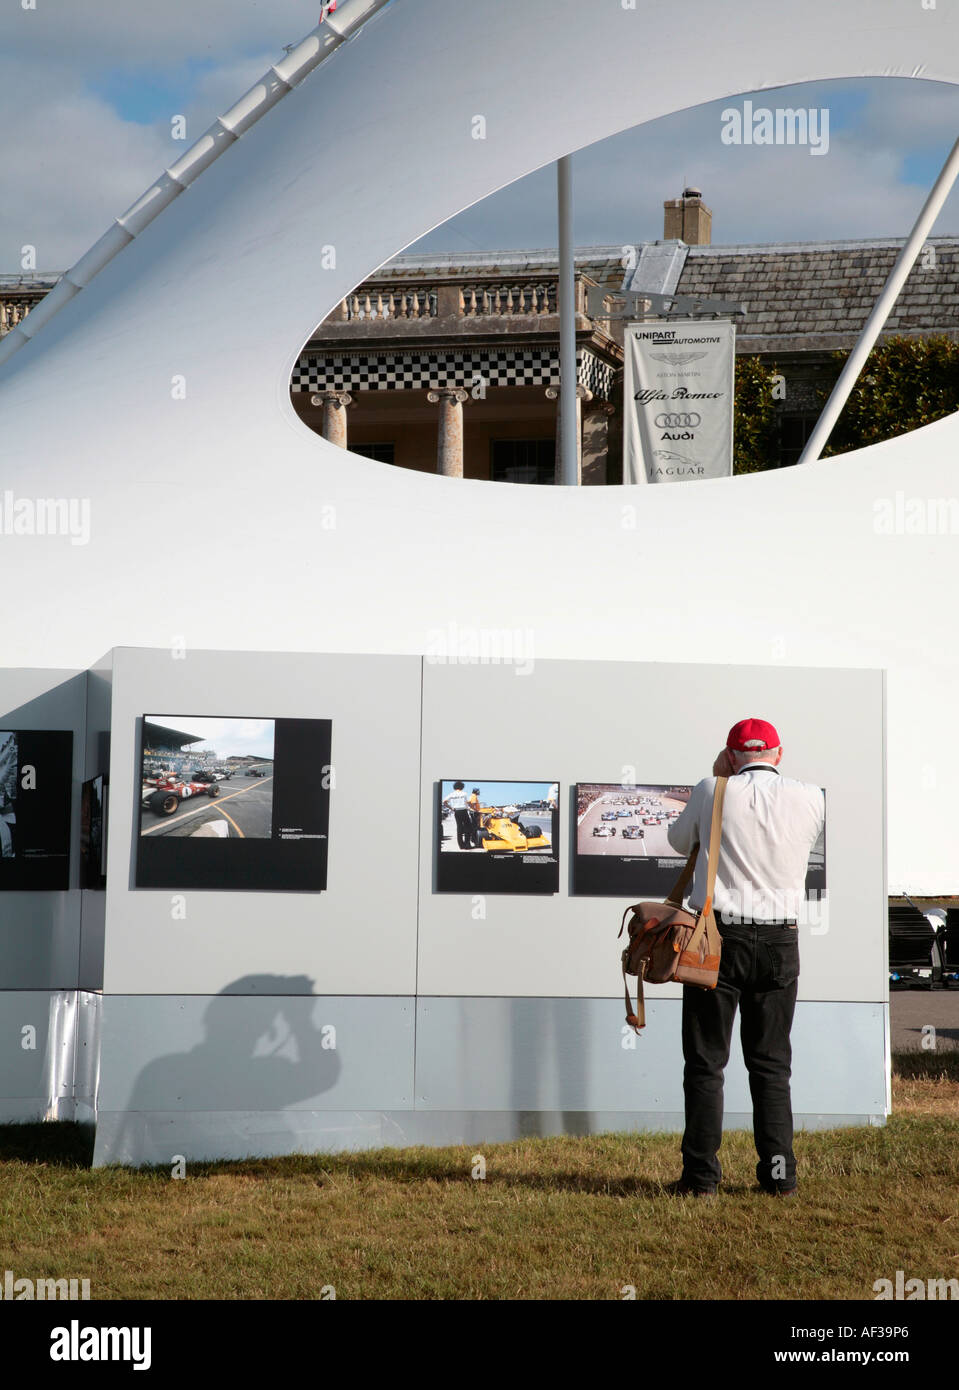 The Renault 100 Years of Motorsport display at the Goodwood Festival of Speed, Sussex, England, 2006. Stock Photo